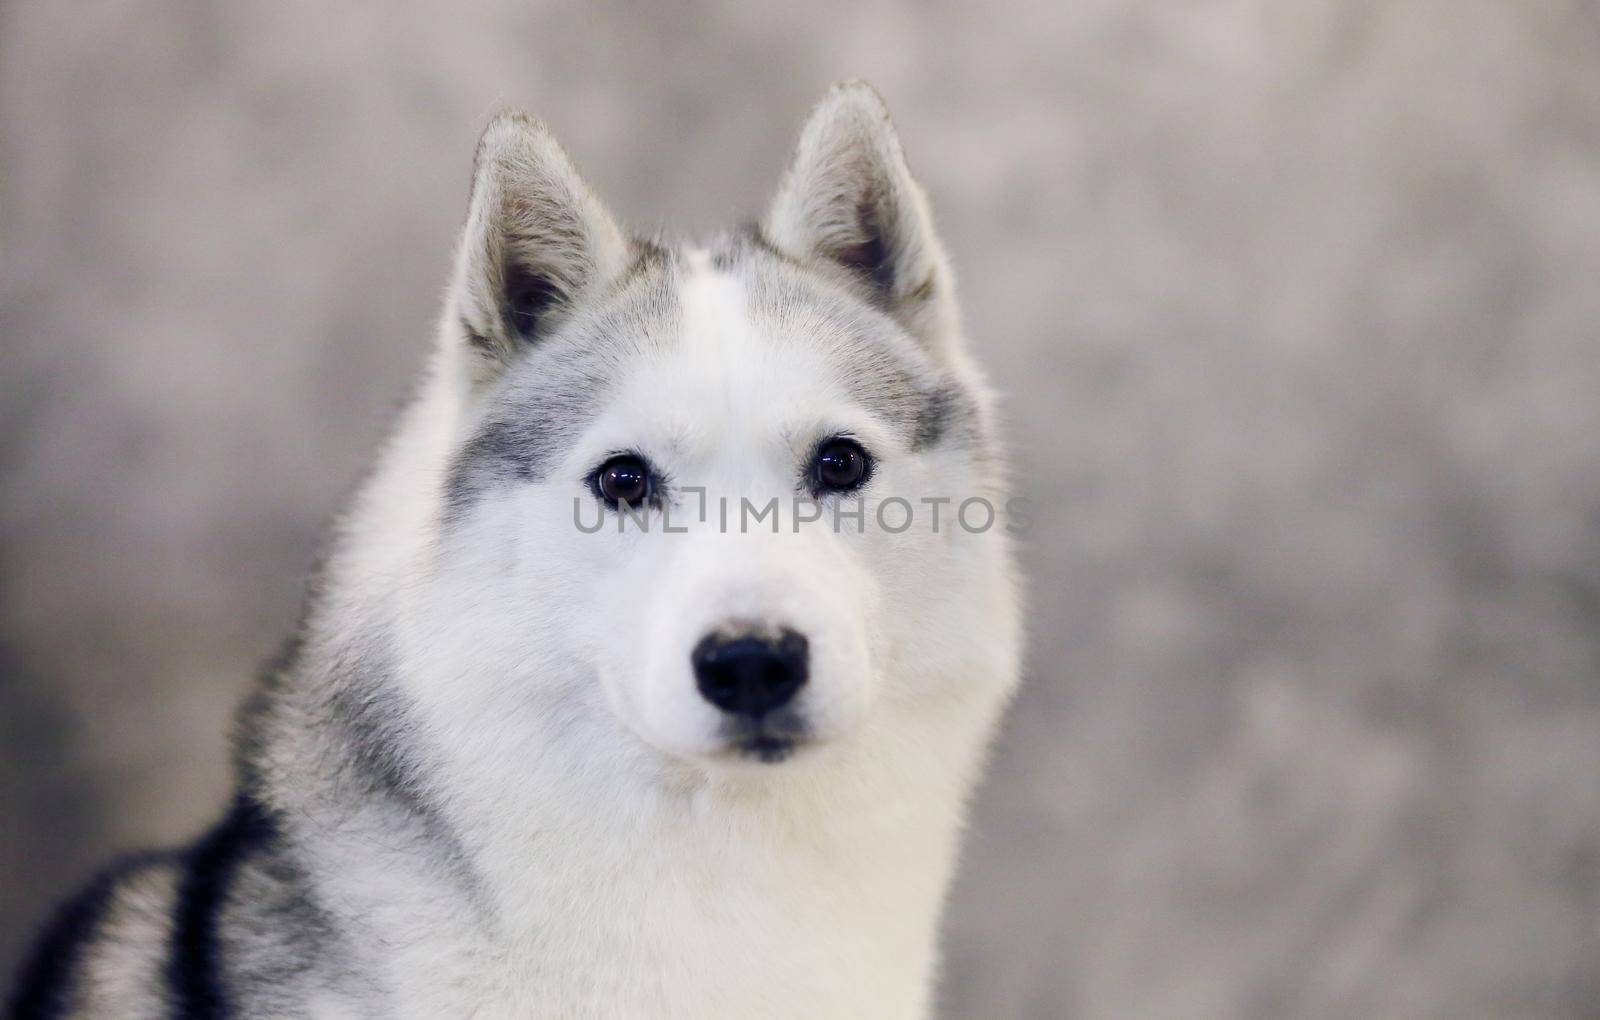 Serious look of a gray and white Siberian Husky dog. 